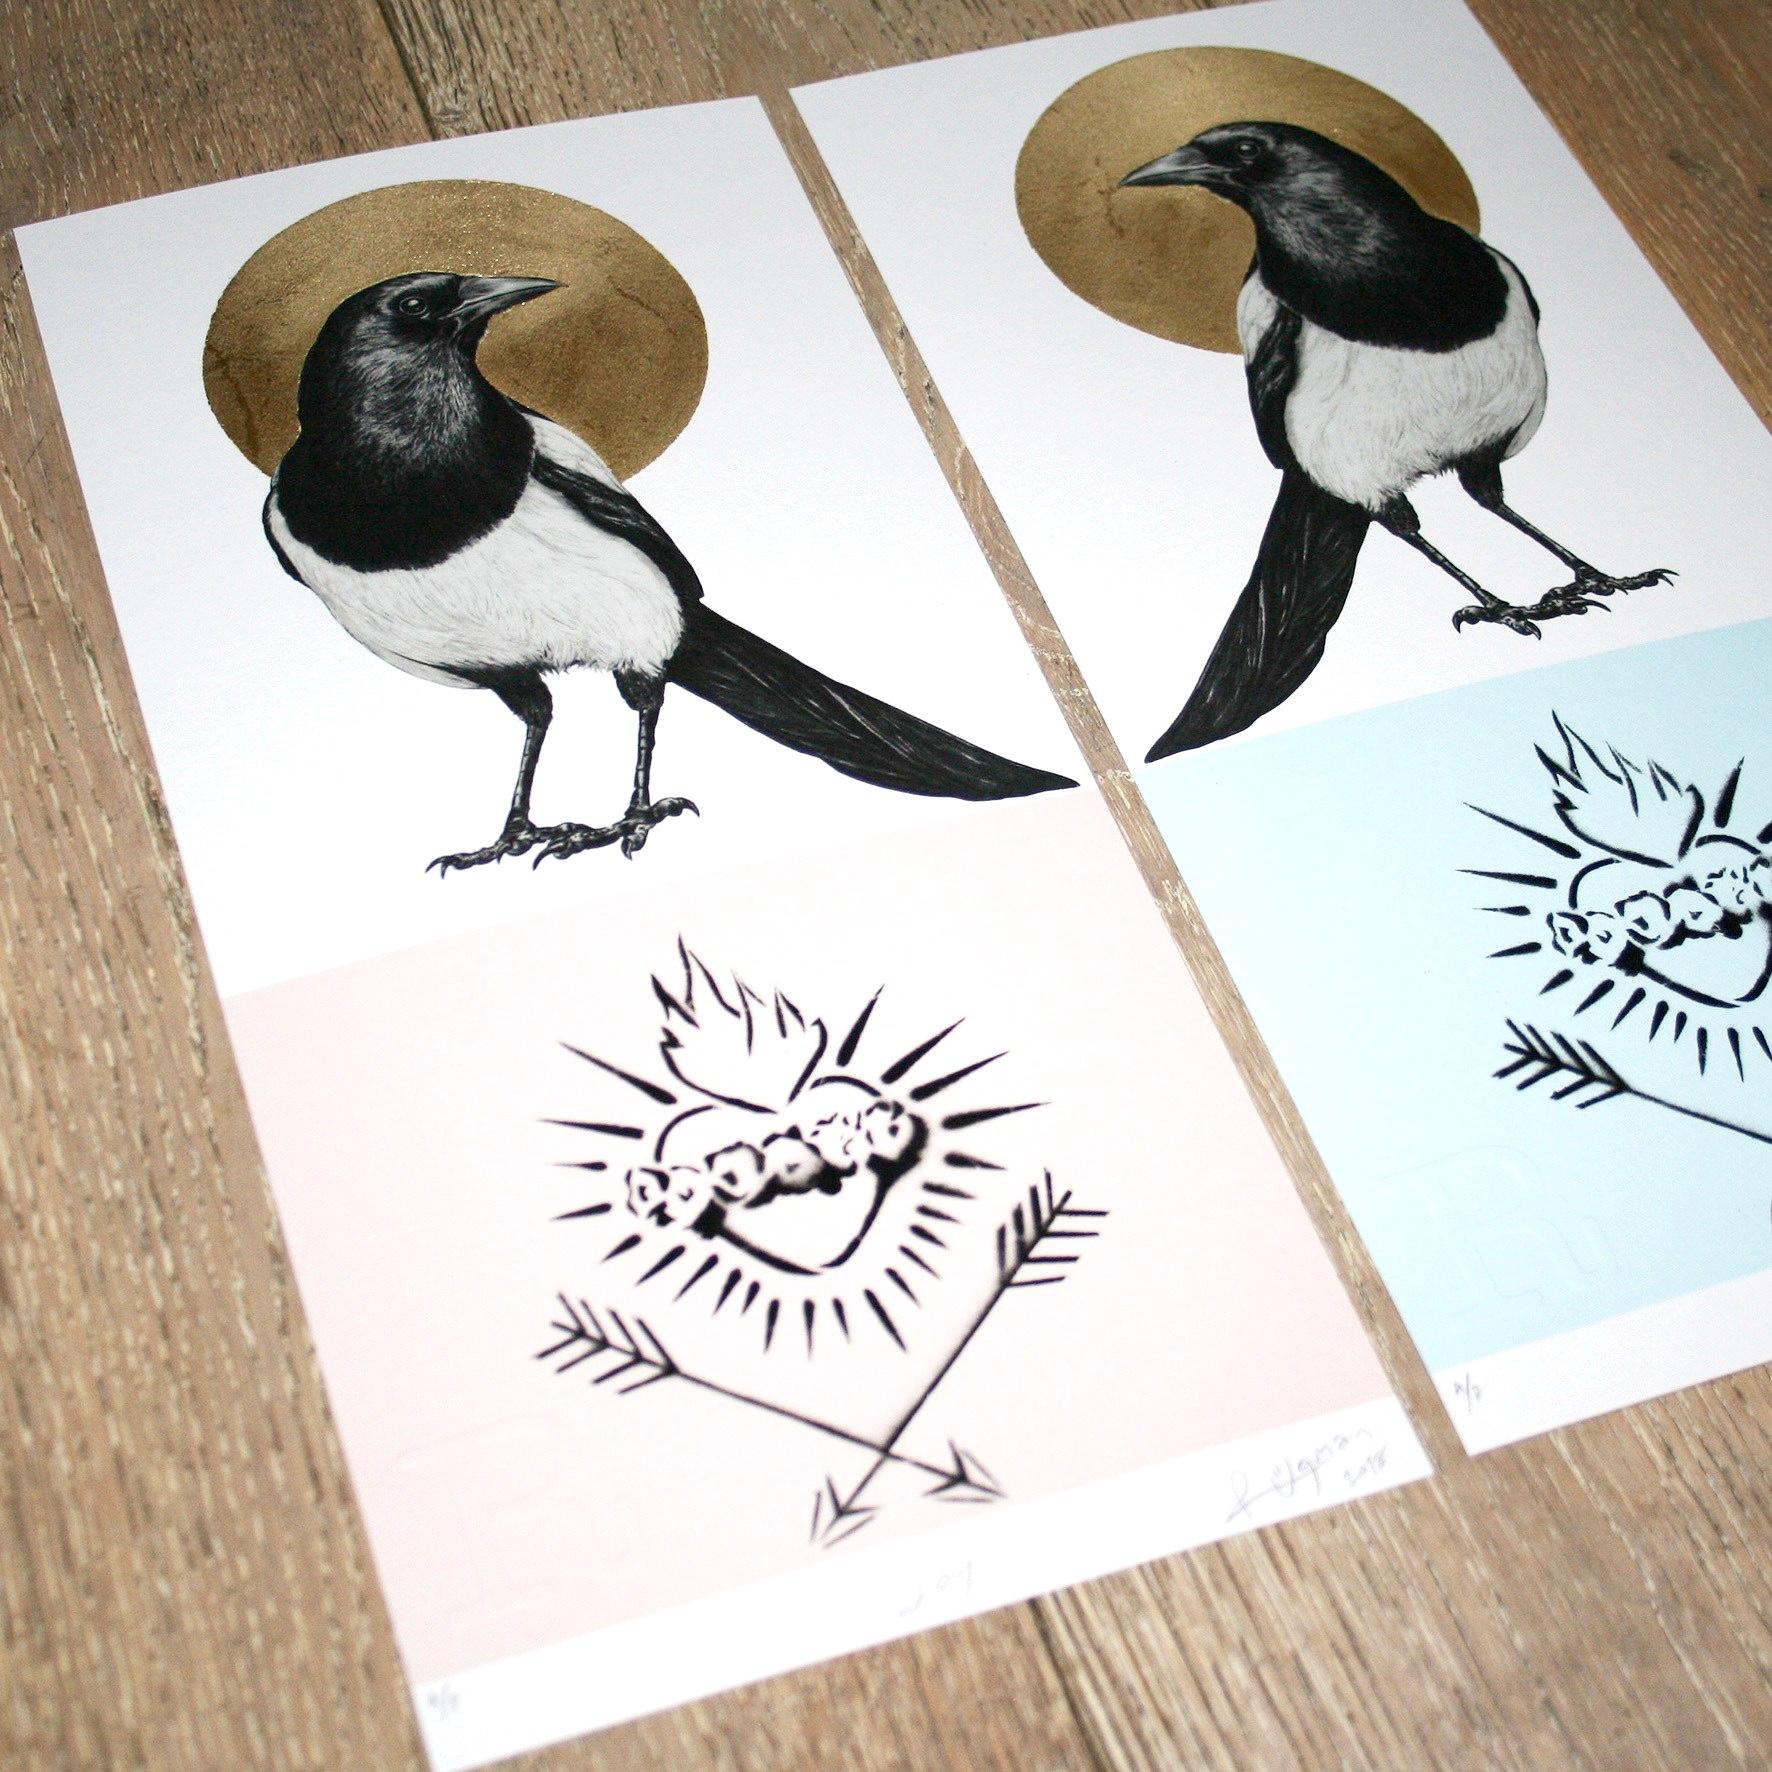 Stunning artwork by Anthony McEwan. JOY - Magpies. You will receive two prints 35cm x 16cm as seen in main image (2 x Blue). You can choose between a mix, Blue (For Boy) & Pink (For Girl) or two Blue for Boy/Boy or two Pink for Girl/Girl. The piece